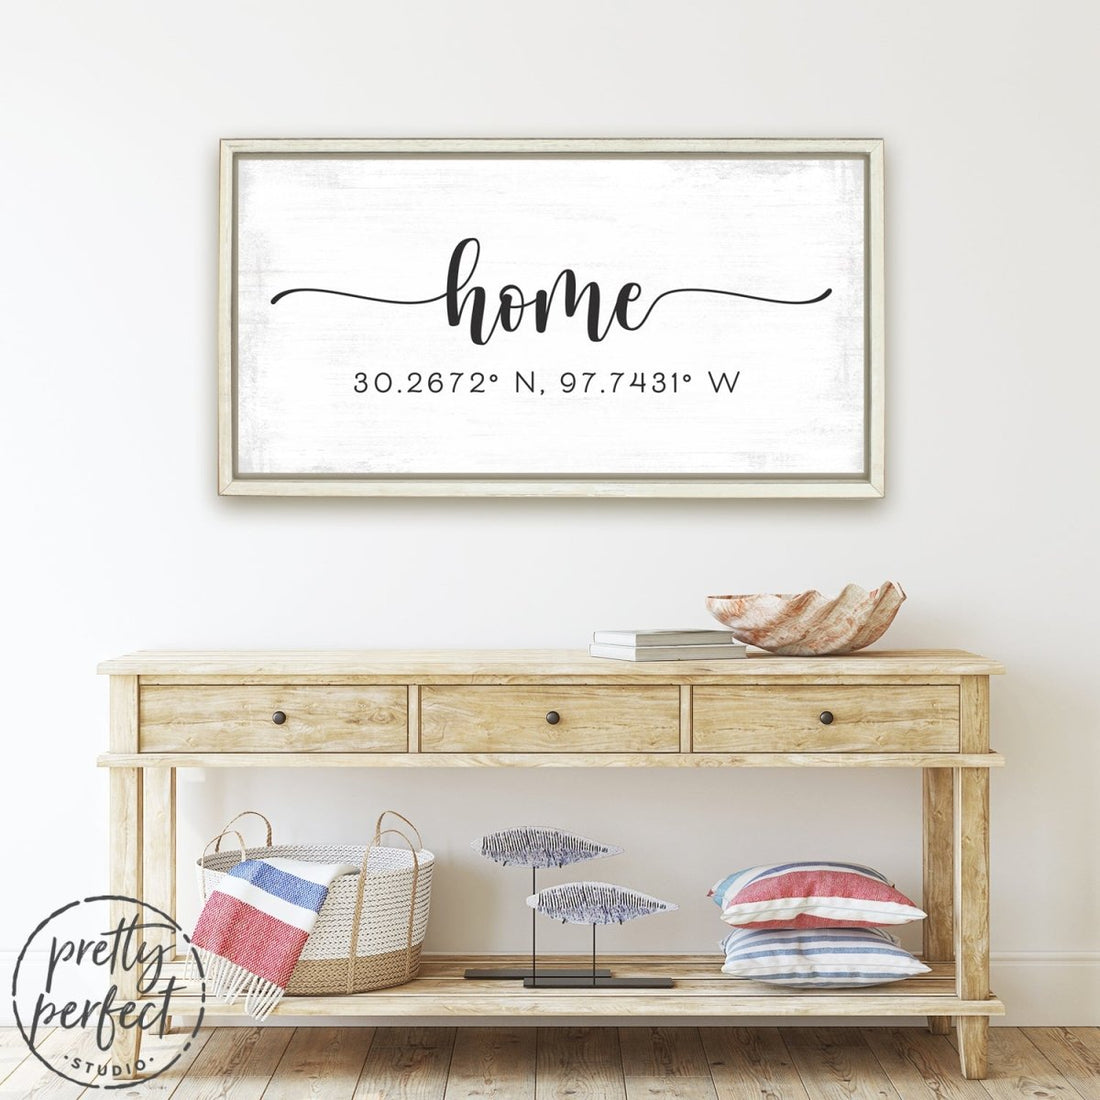 Home sweet home Sign Customized Wall Art - Pretty Perfect Studio